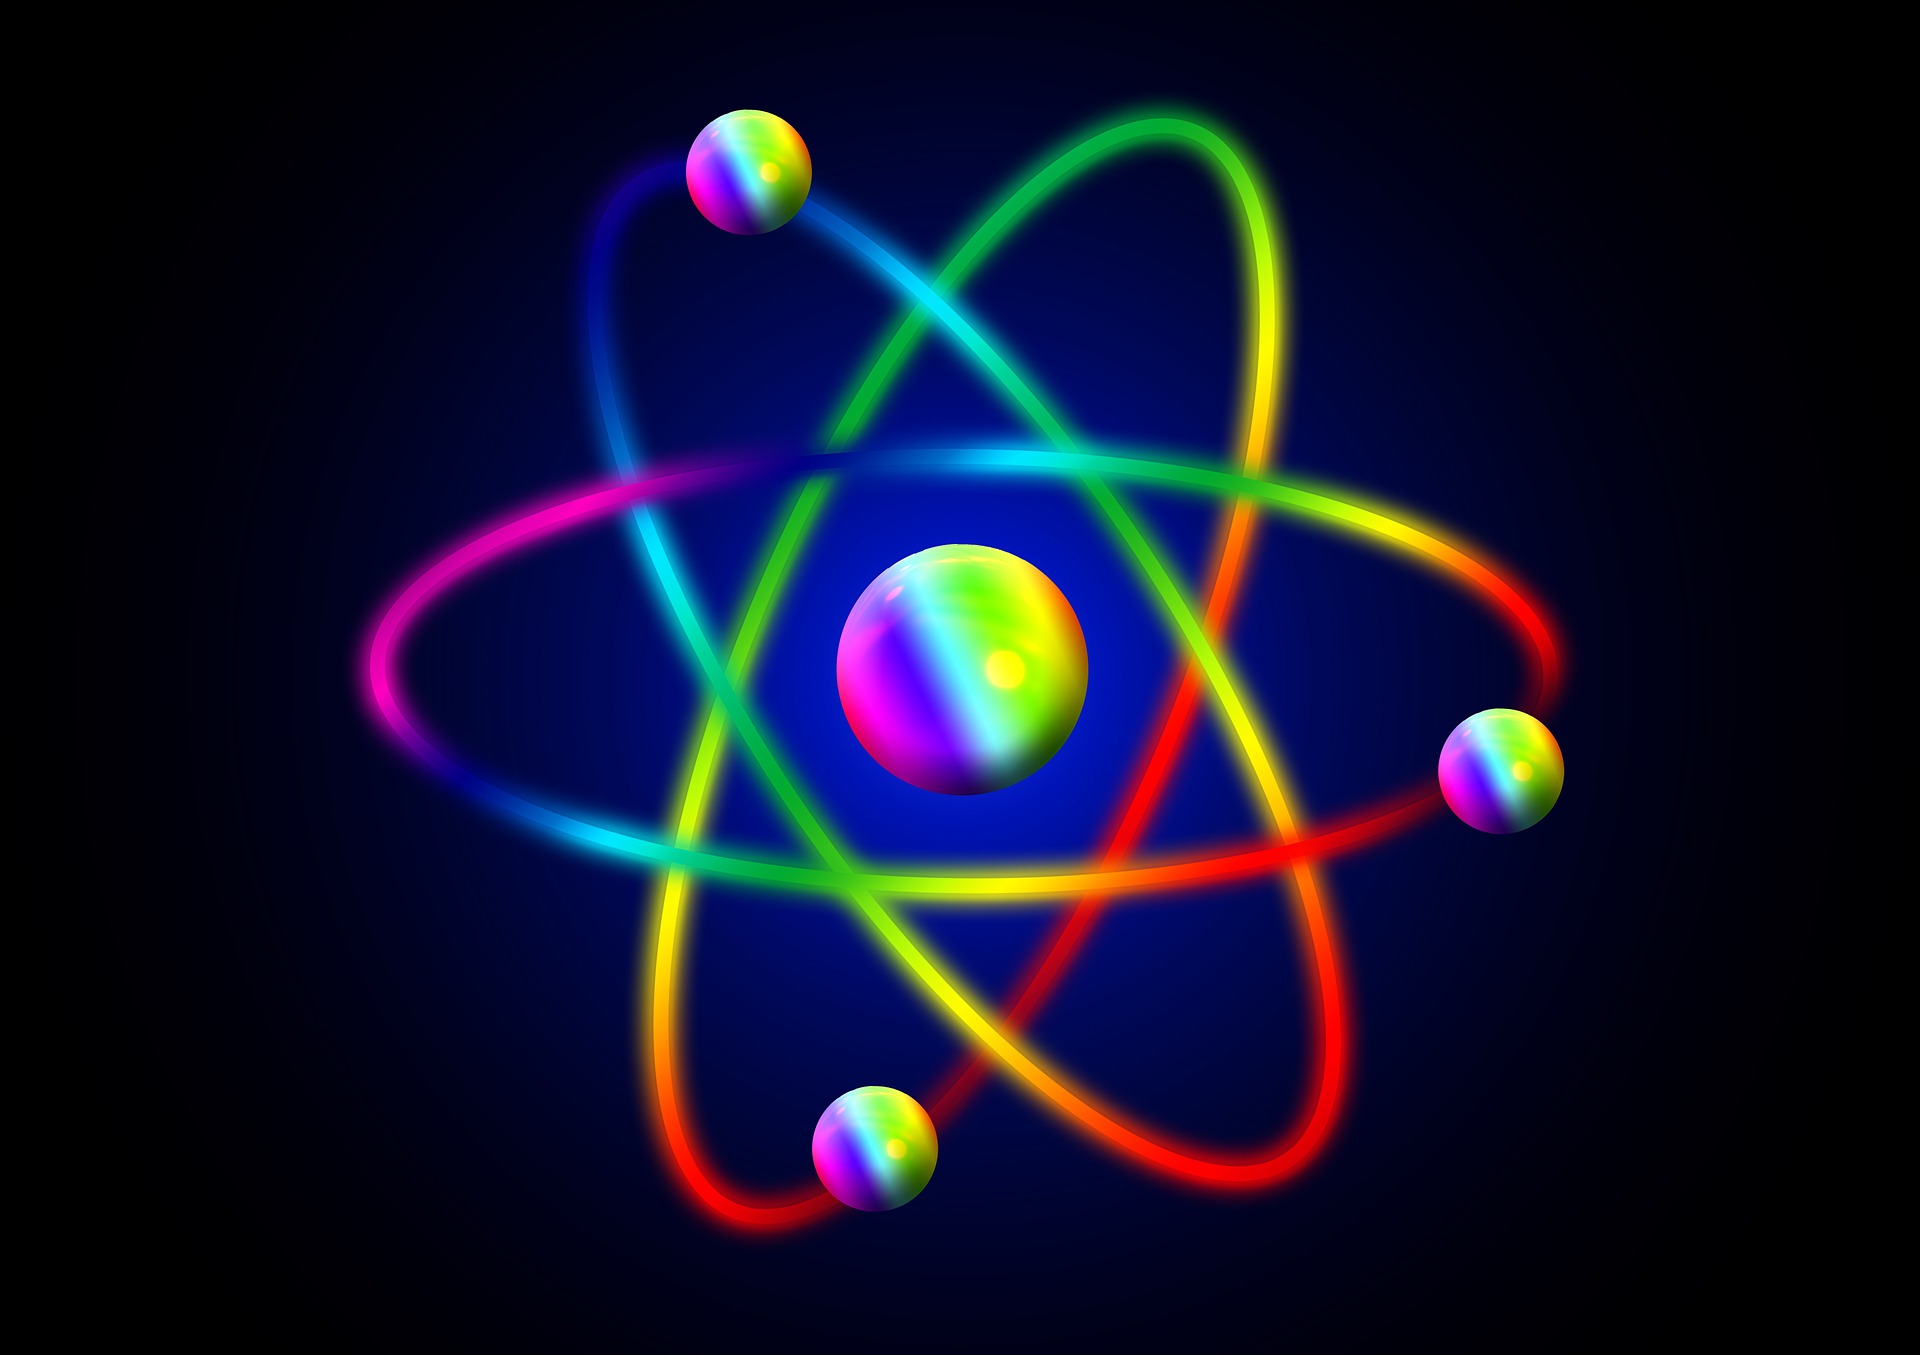 An atom graphic coloured with a rainbow gradient